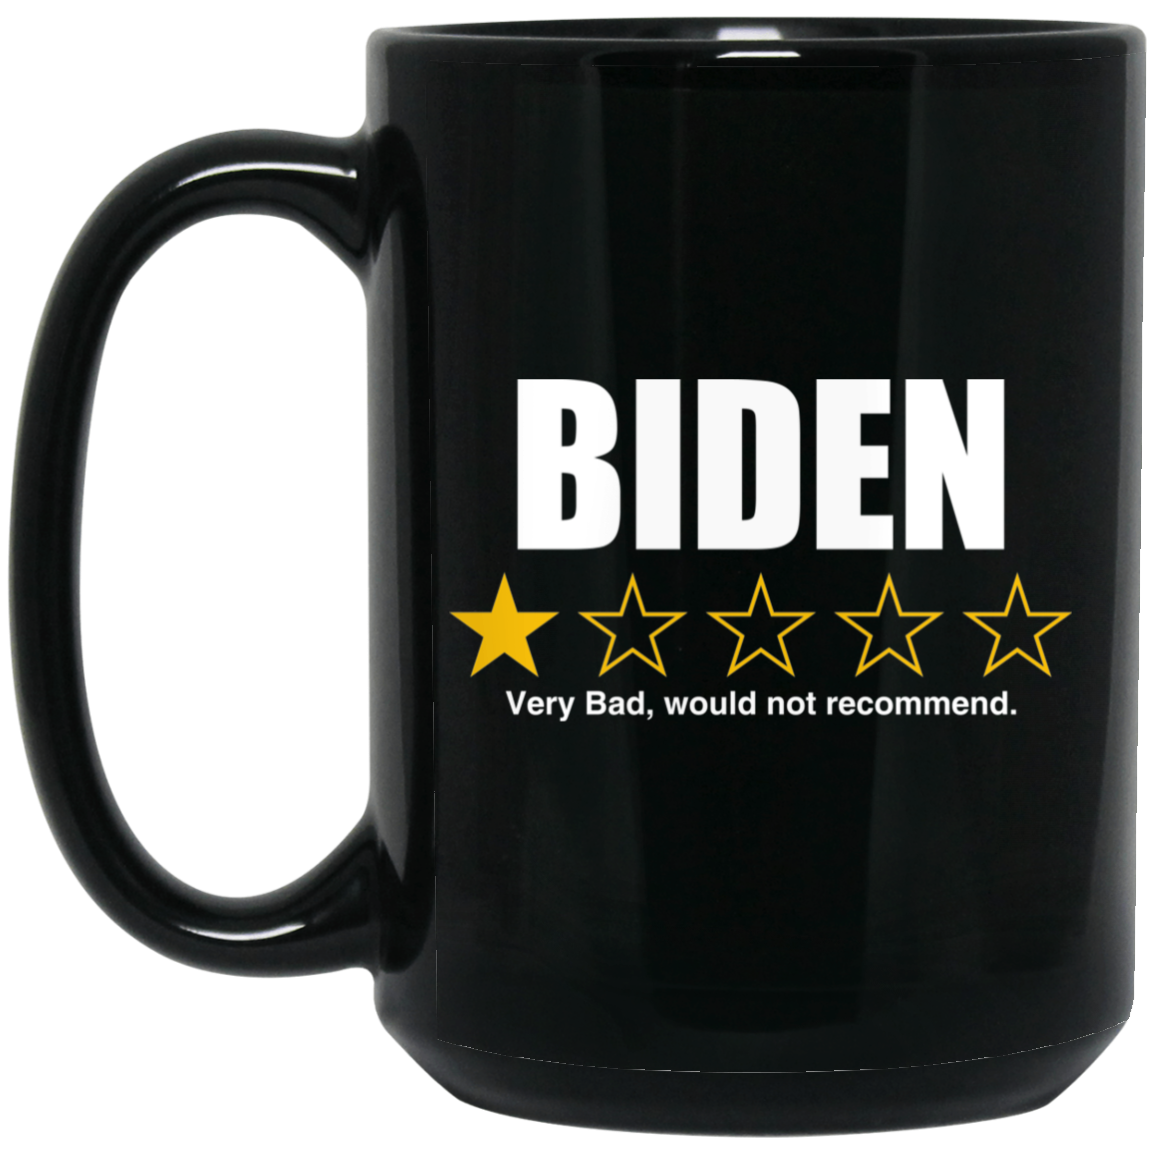 1 Star Rating - BIDEN Not Recommended - MUGS